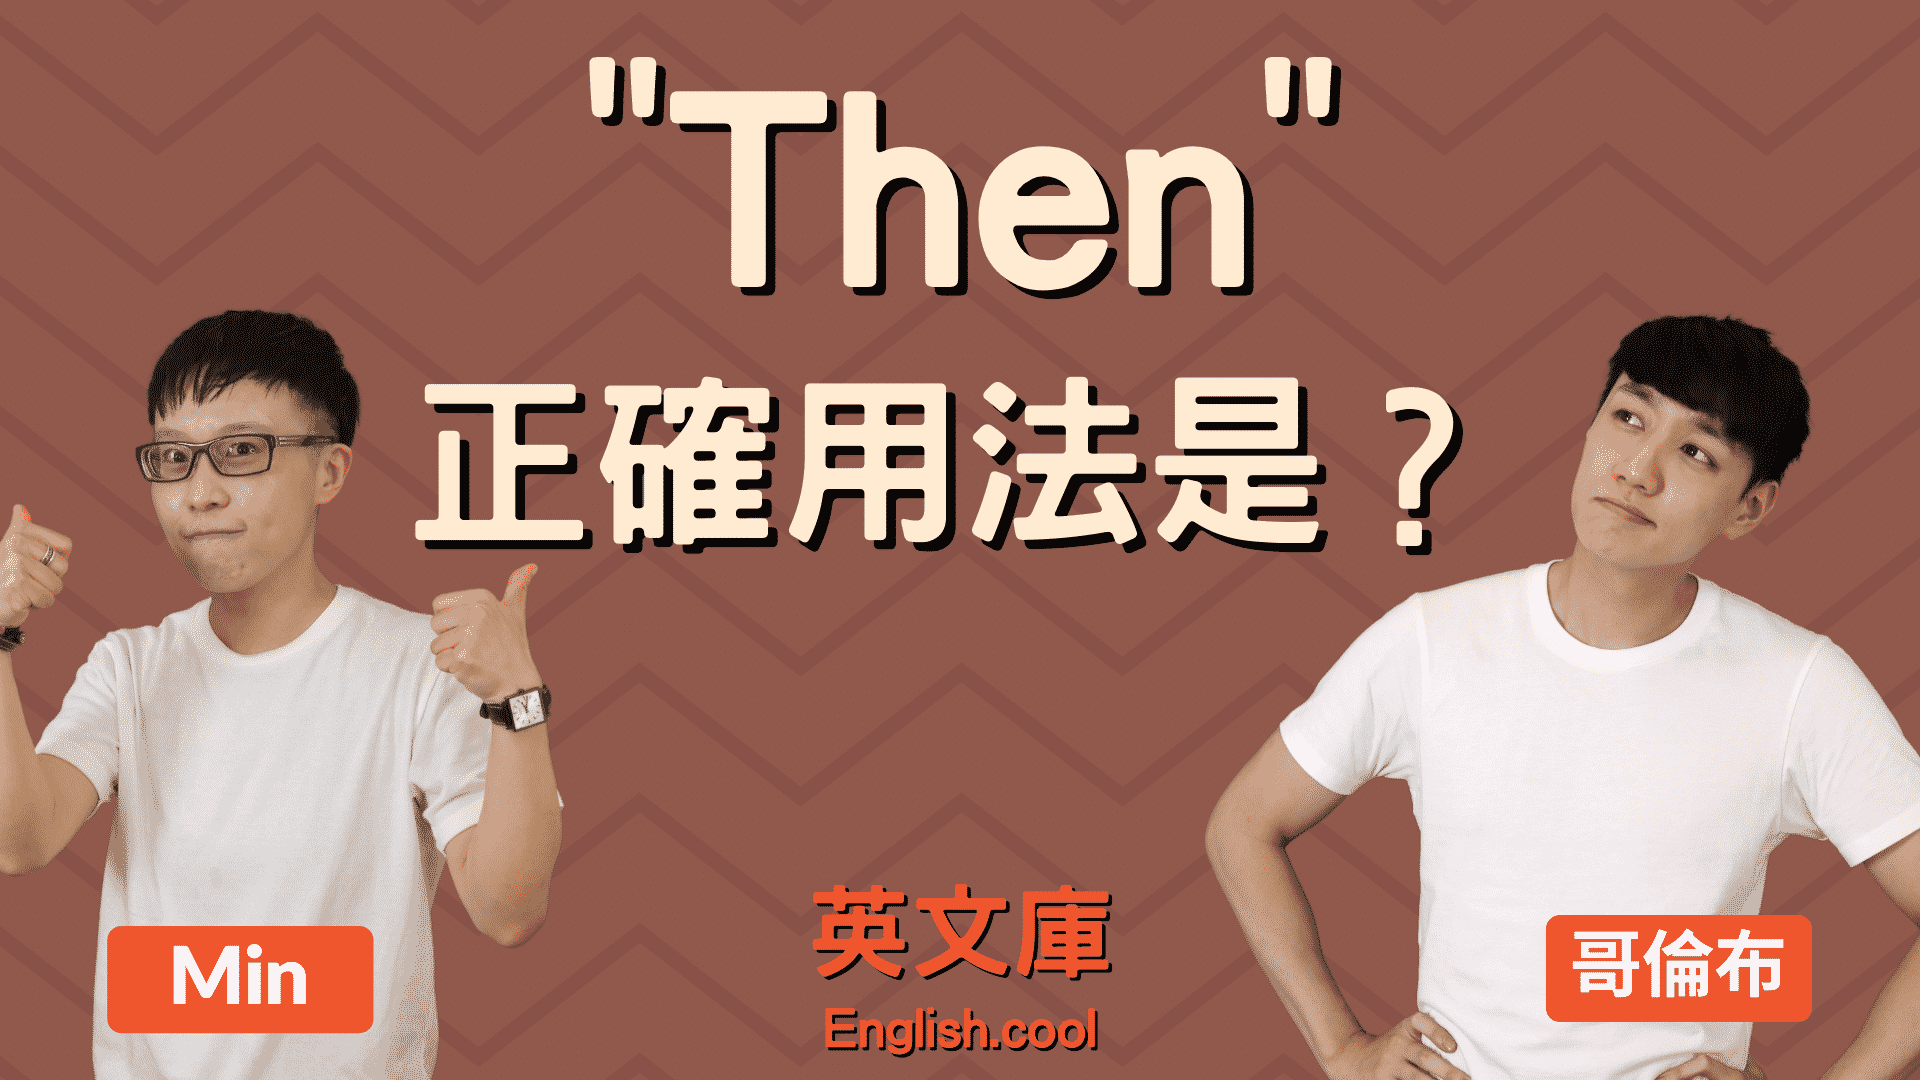 You are currently viewing 「then」正確用法是什麼？來看例句搞懂！